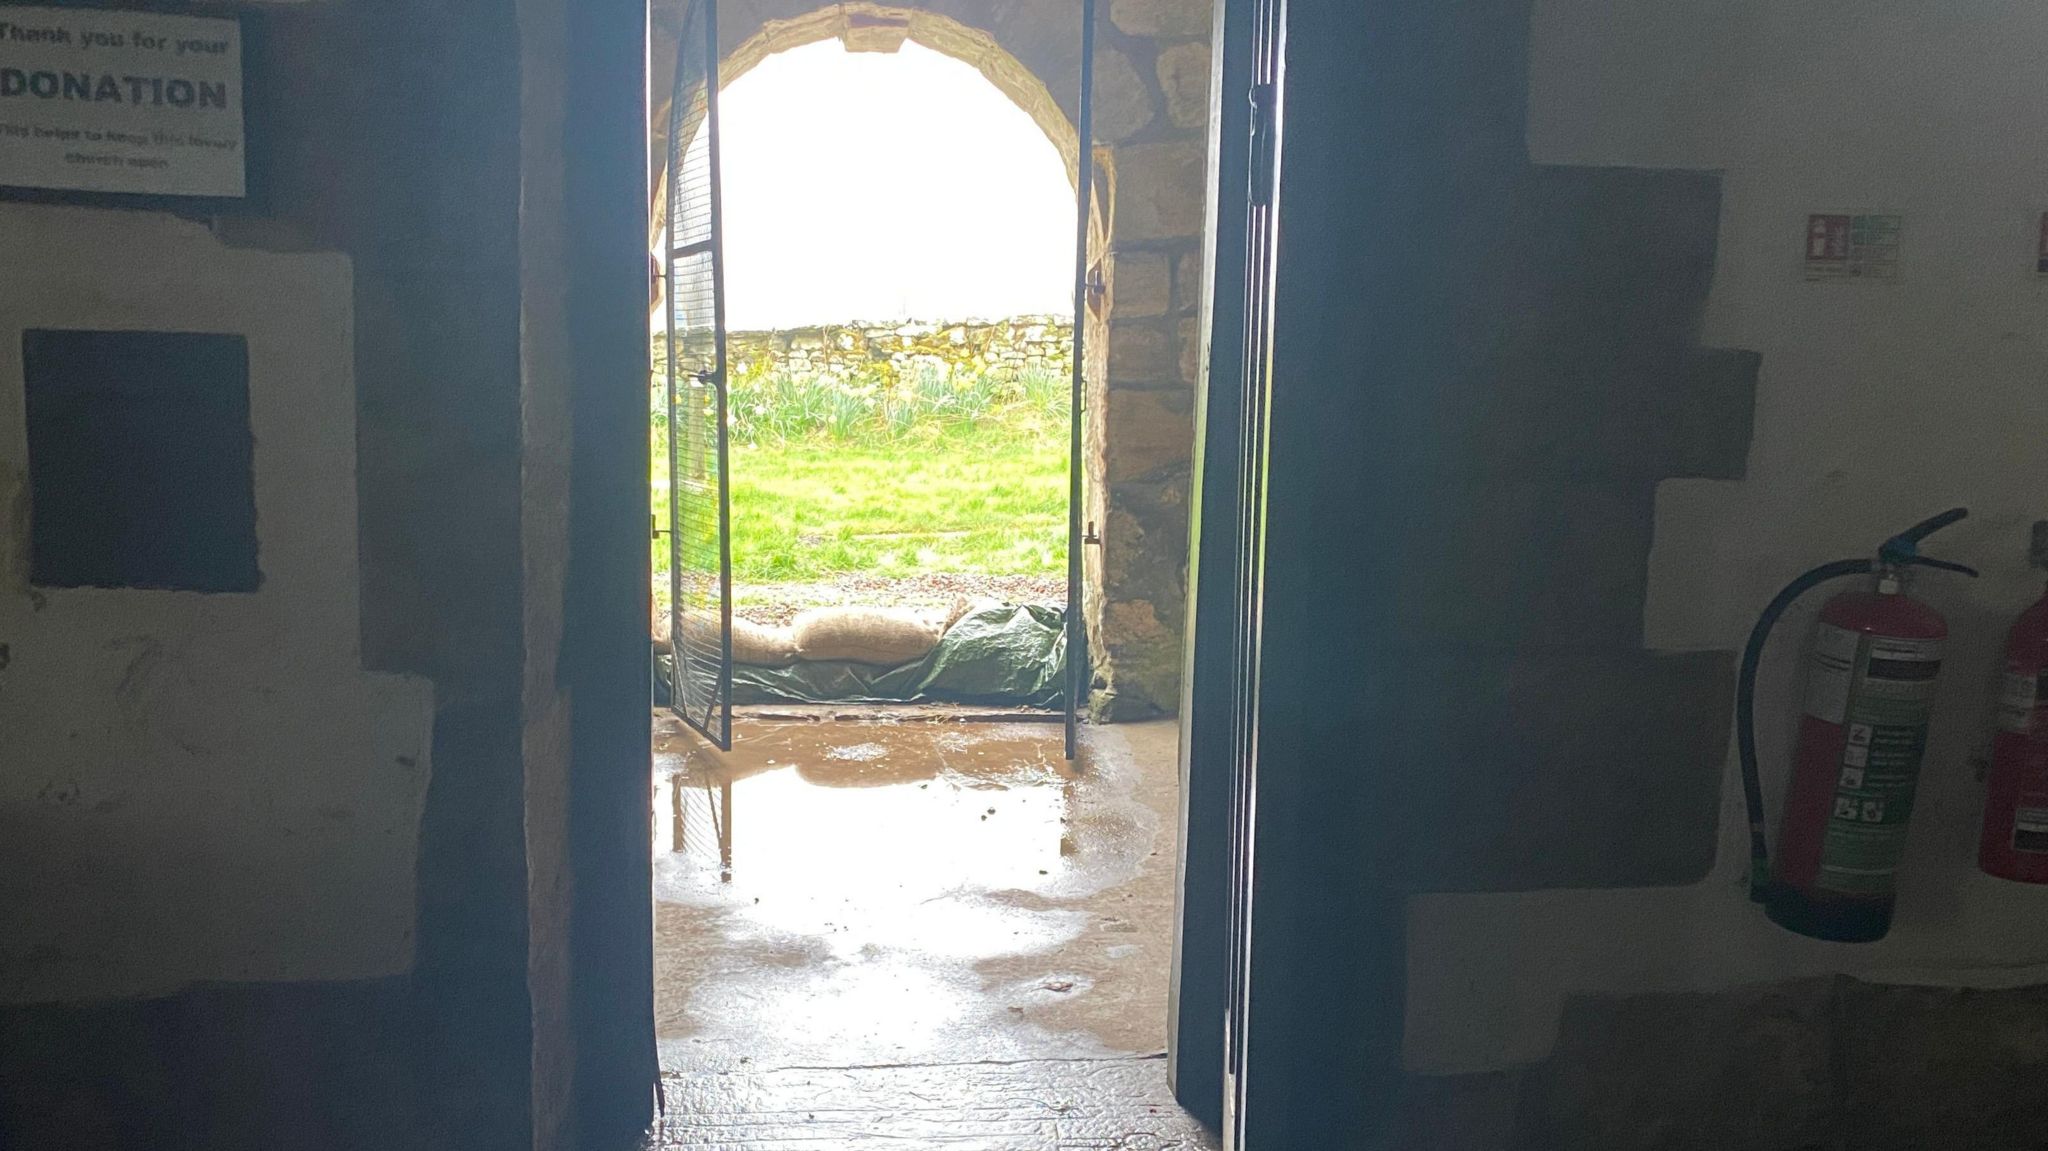 A church door from the inside of the church showing sandbags at the door